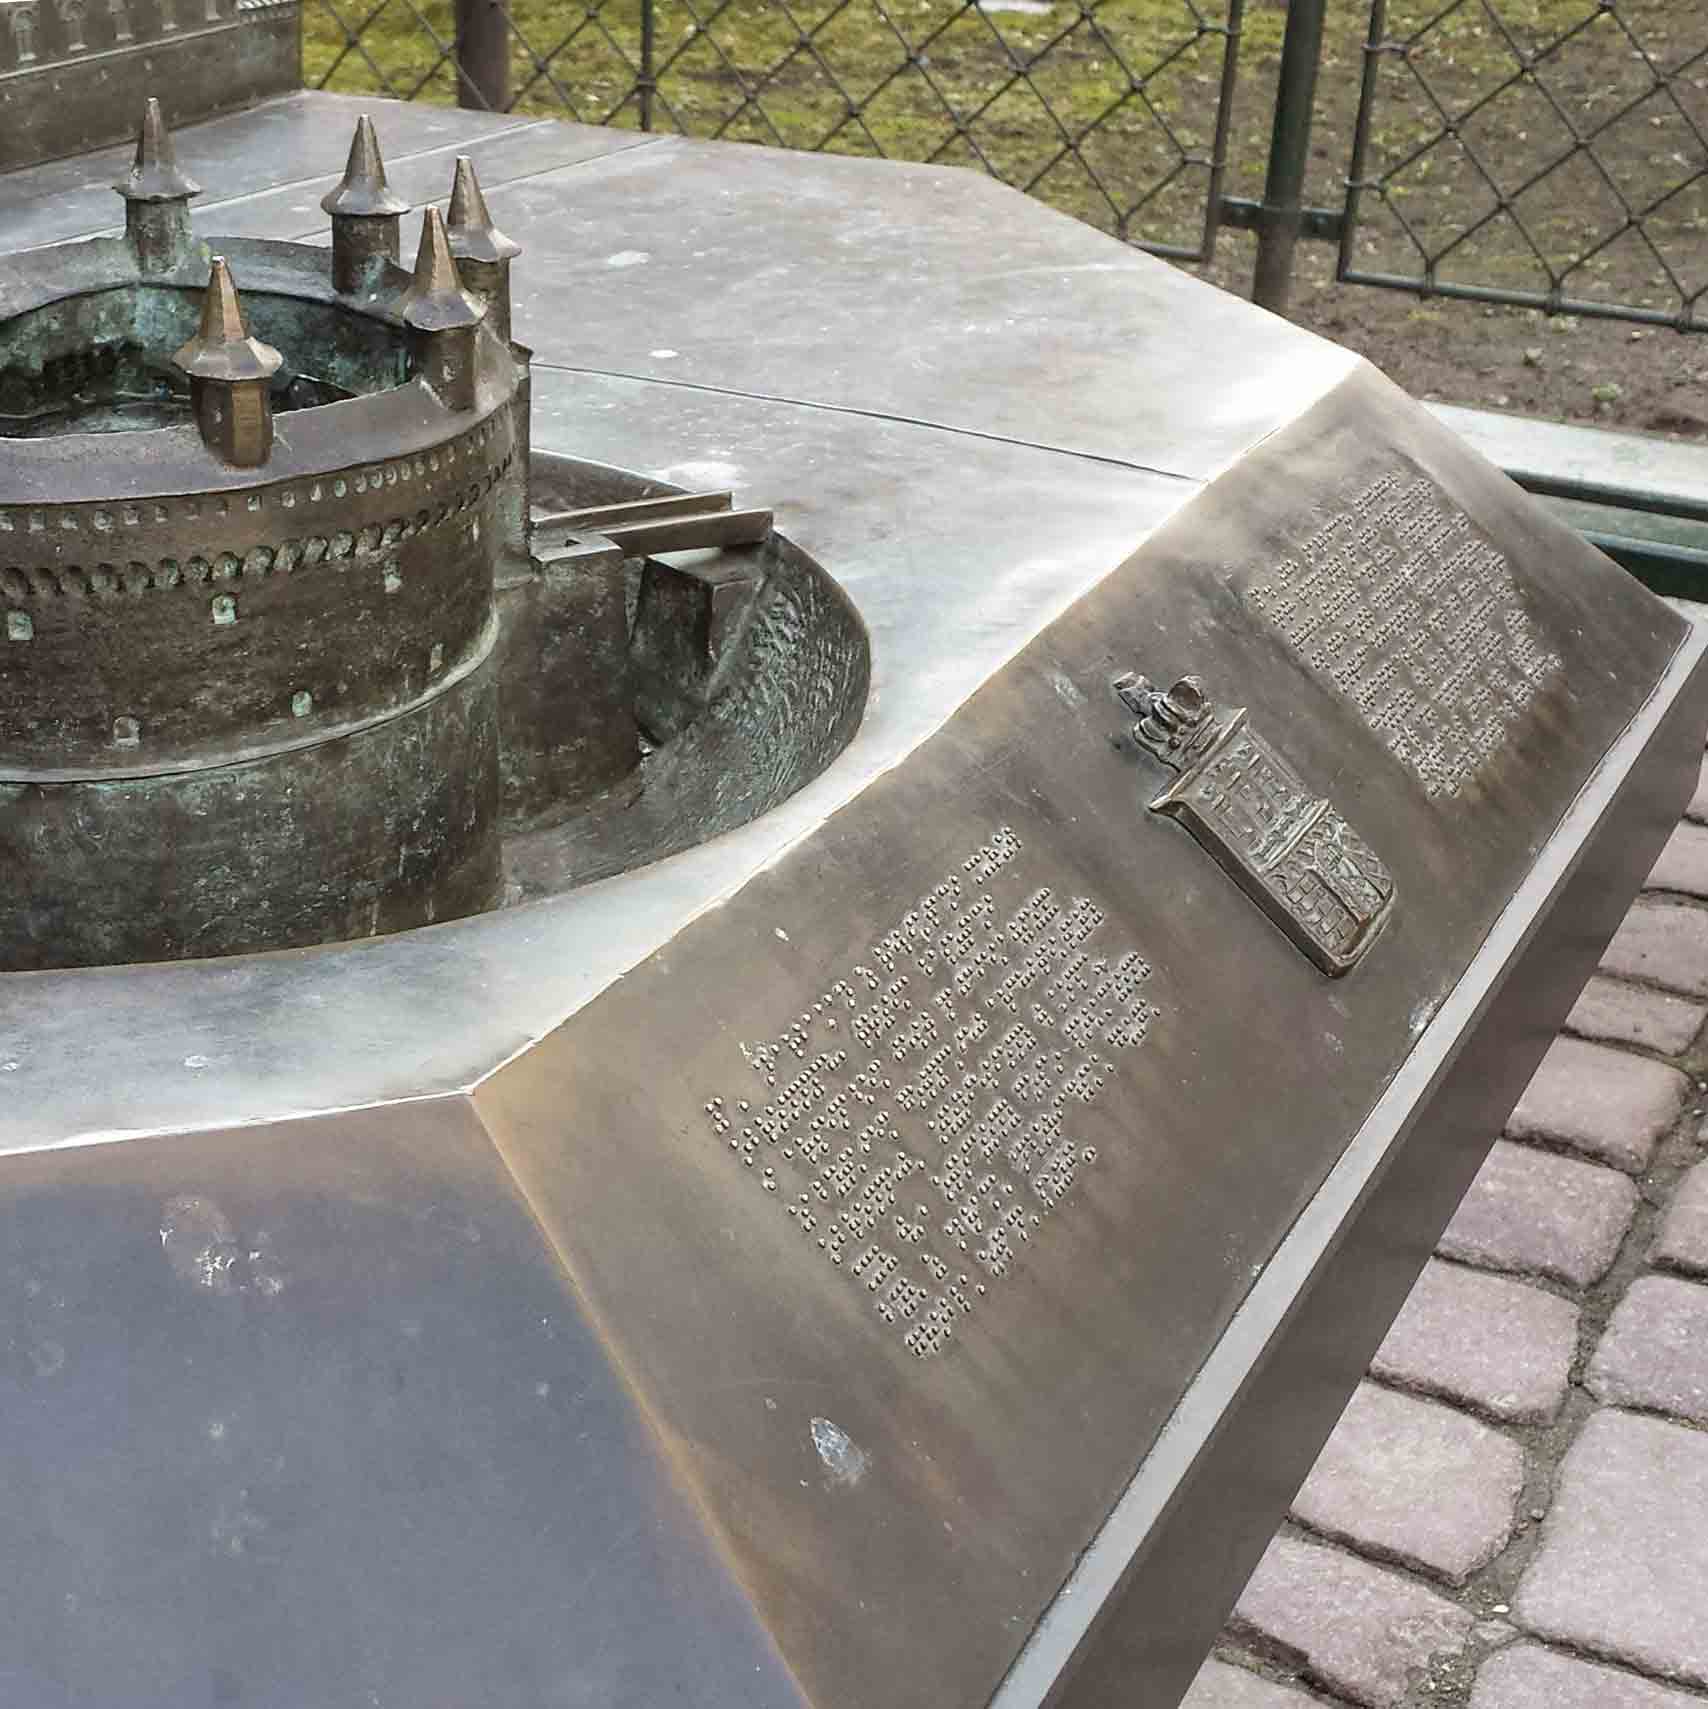 Outdoor metal tactile map / sculpture of a fortress with a Braille explainer set in front of it.